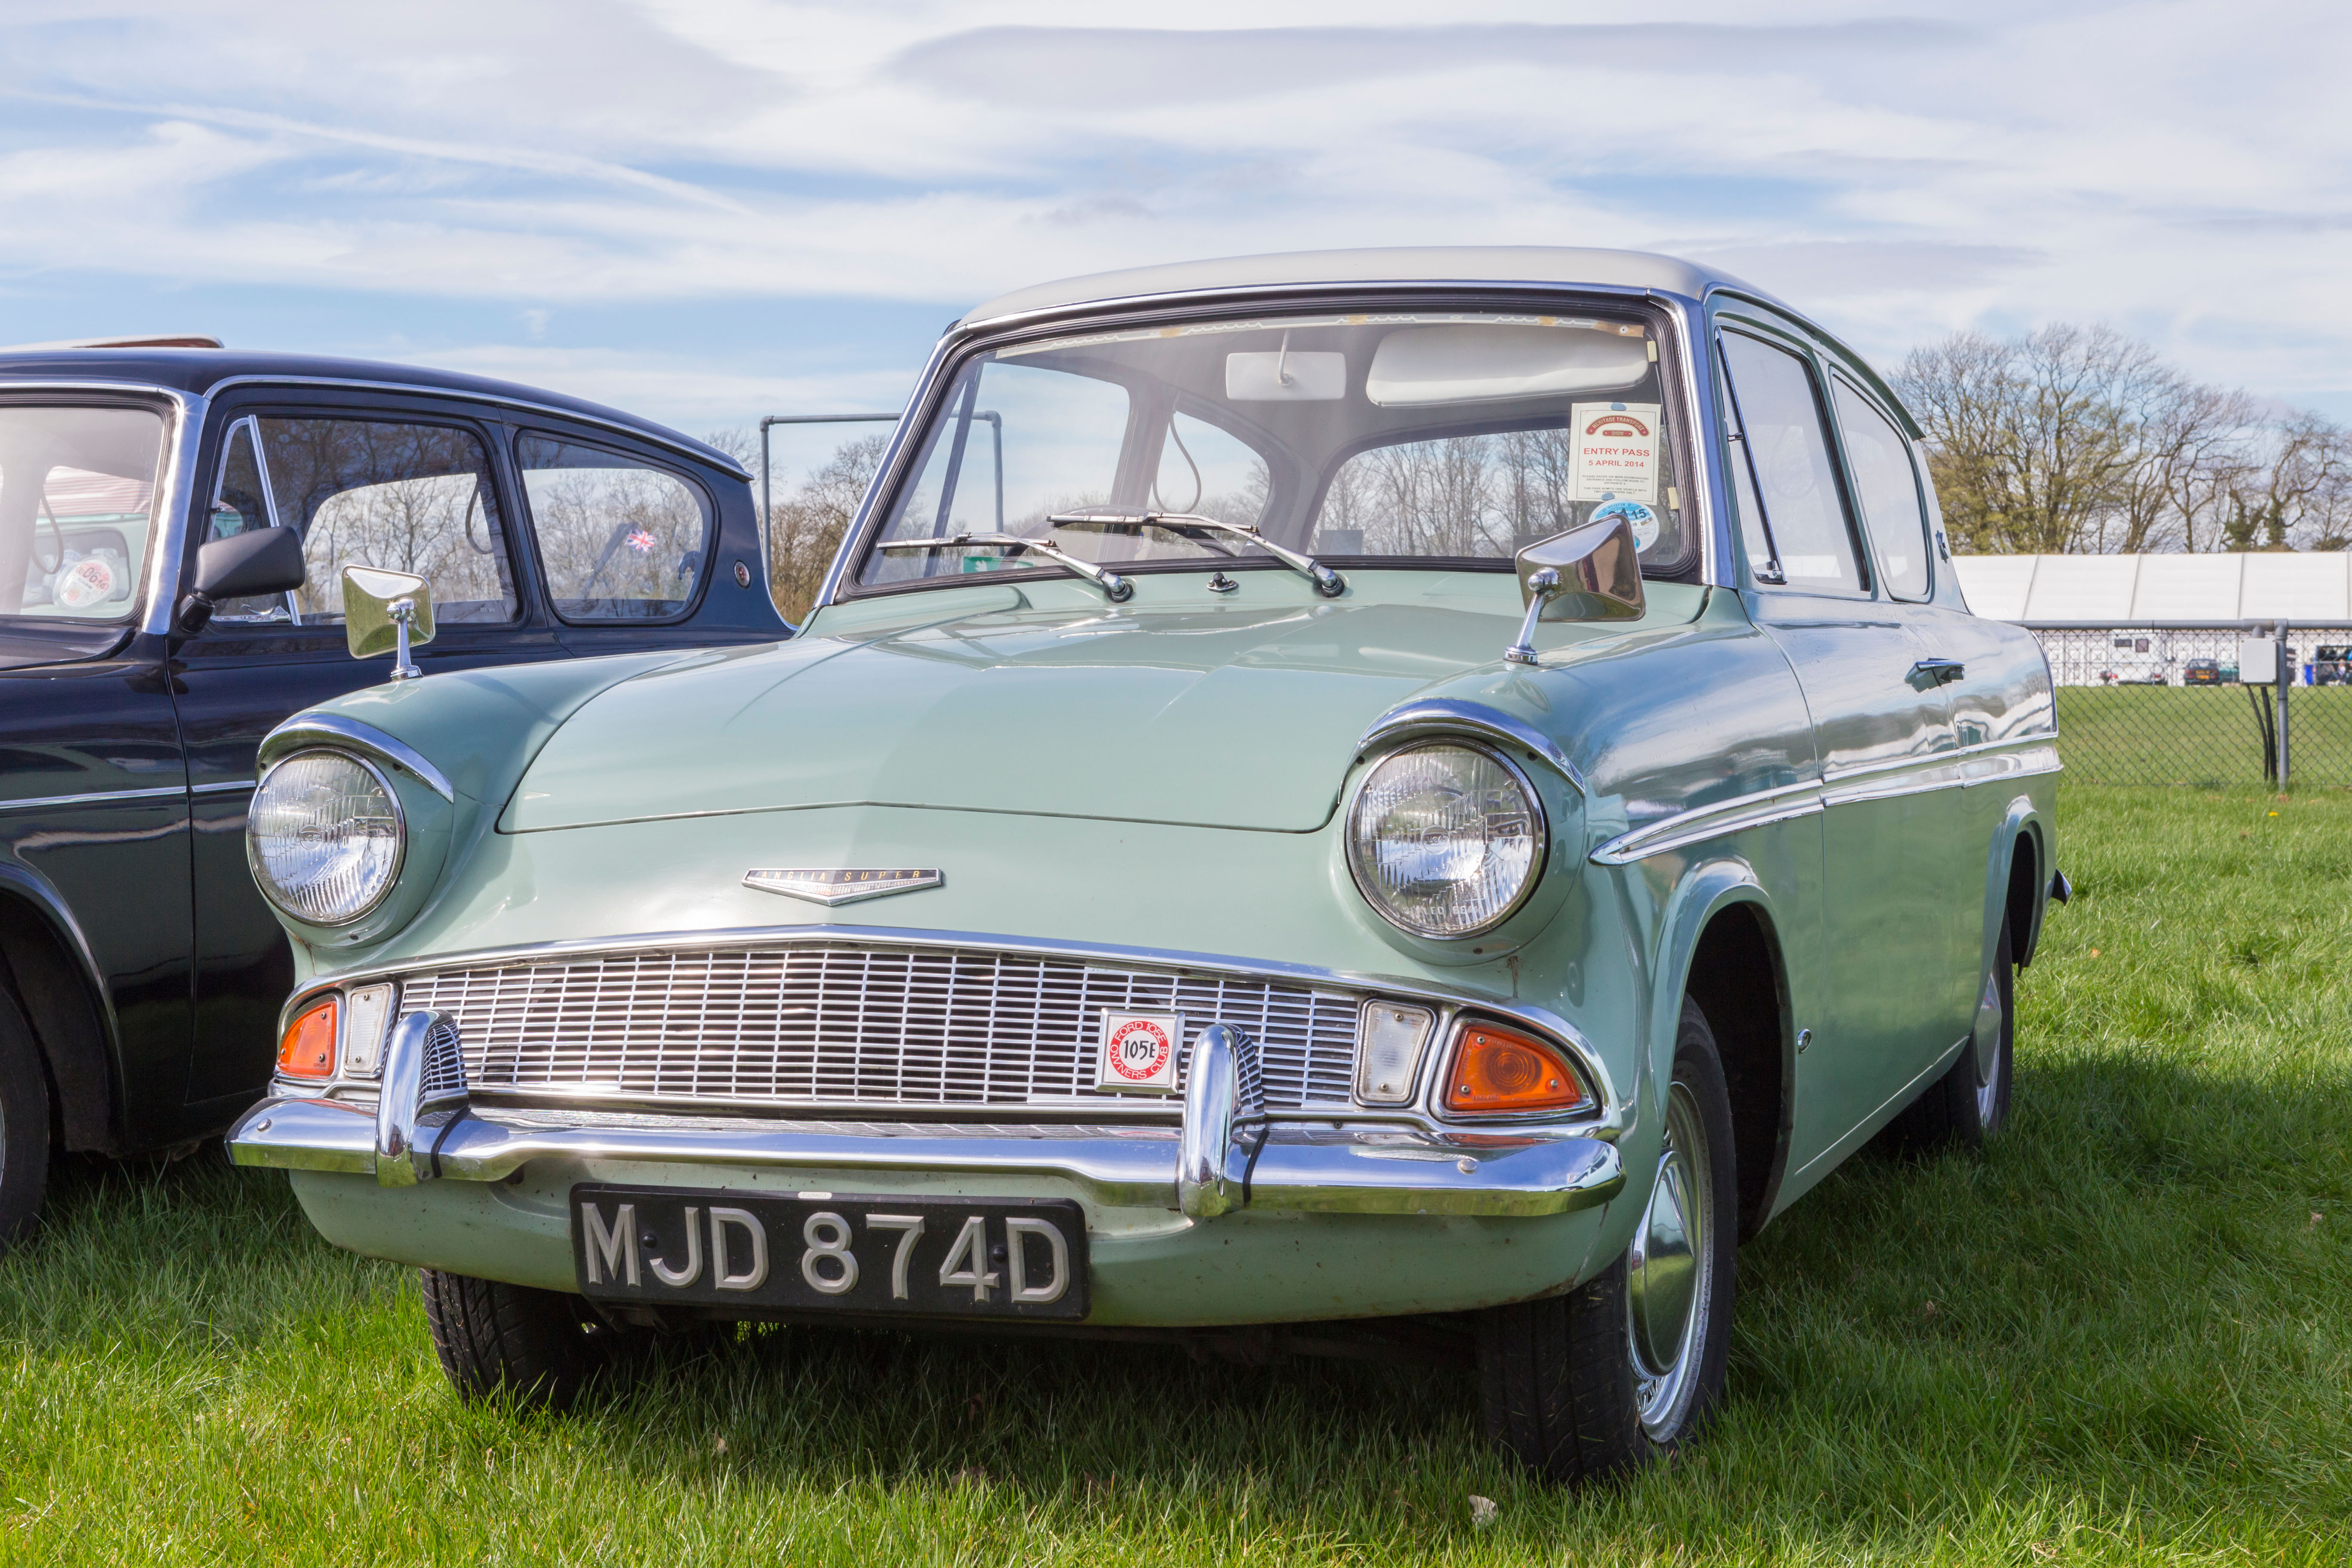 He bought a Ford Anglia aged 15 but never got to drive it (stock image)